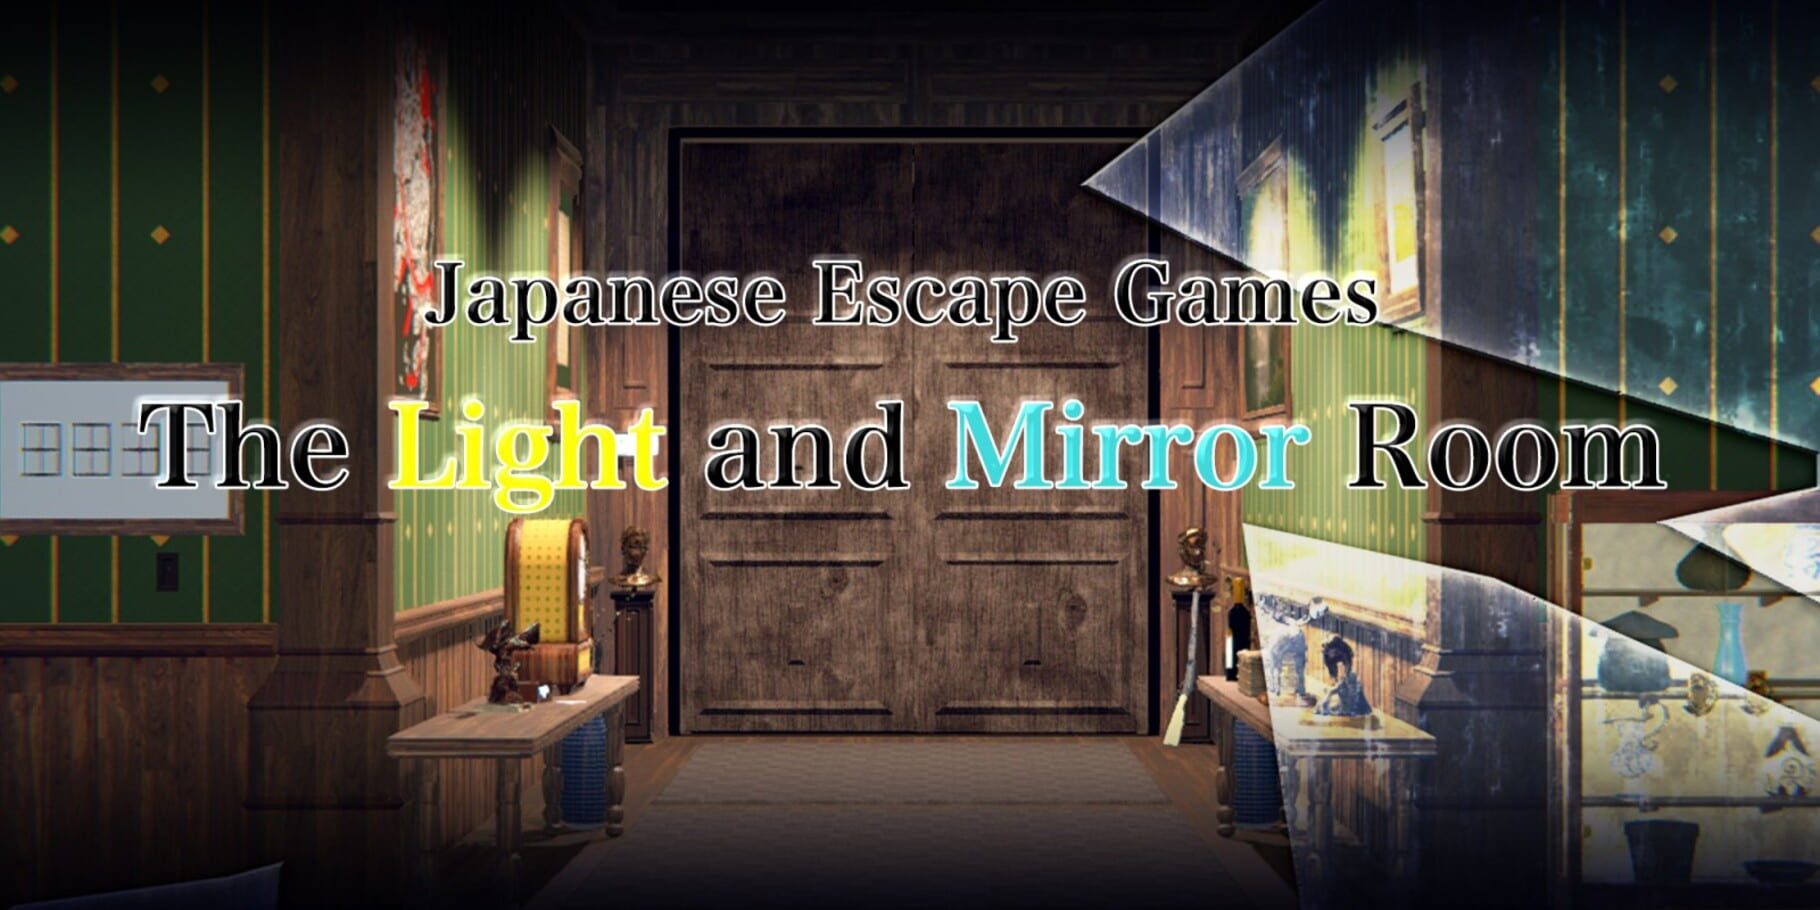 Japanese Escape Games: The Light and Mirror Room artwork